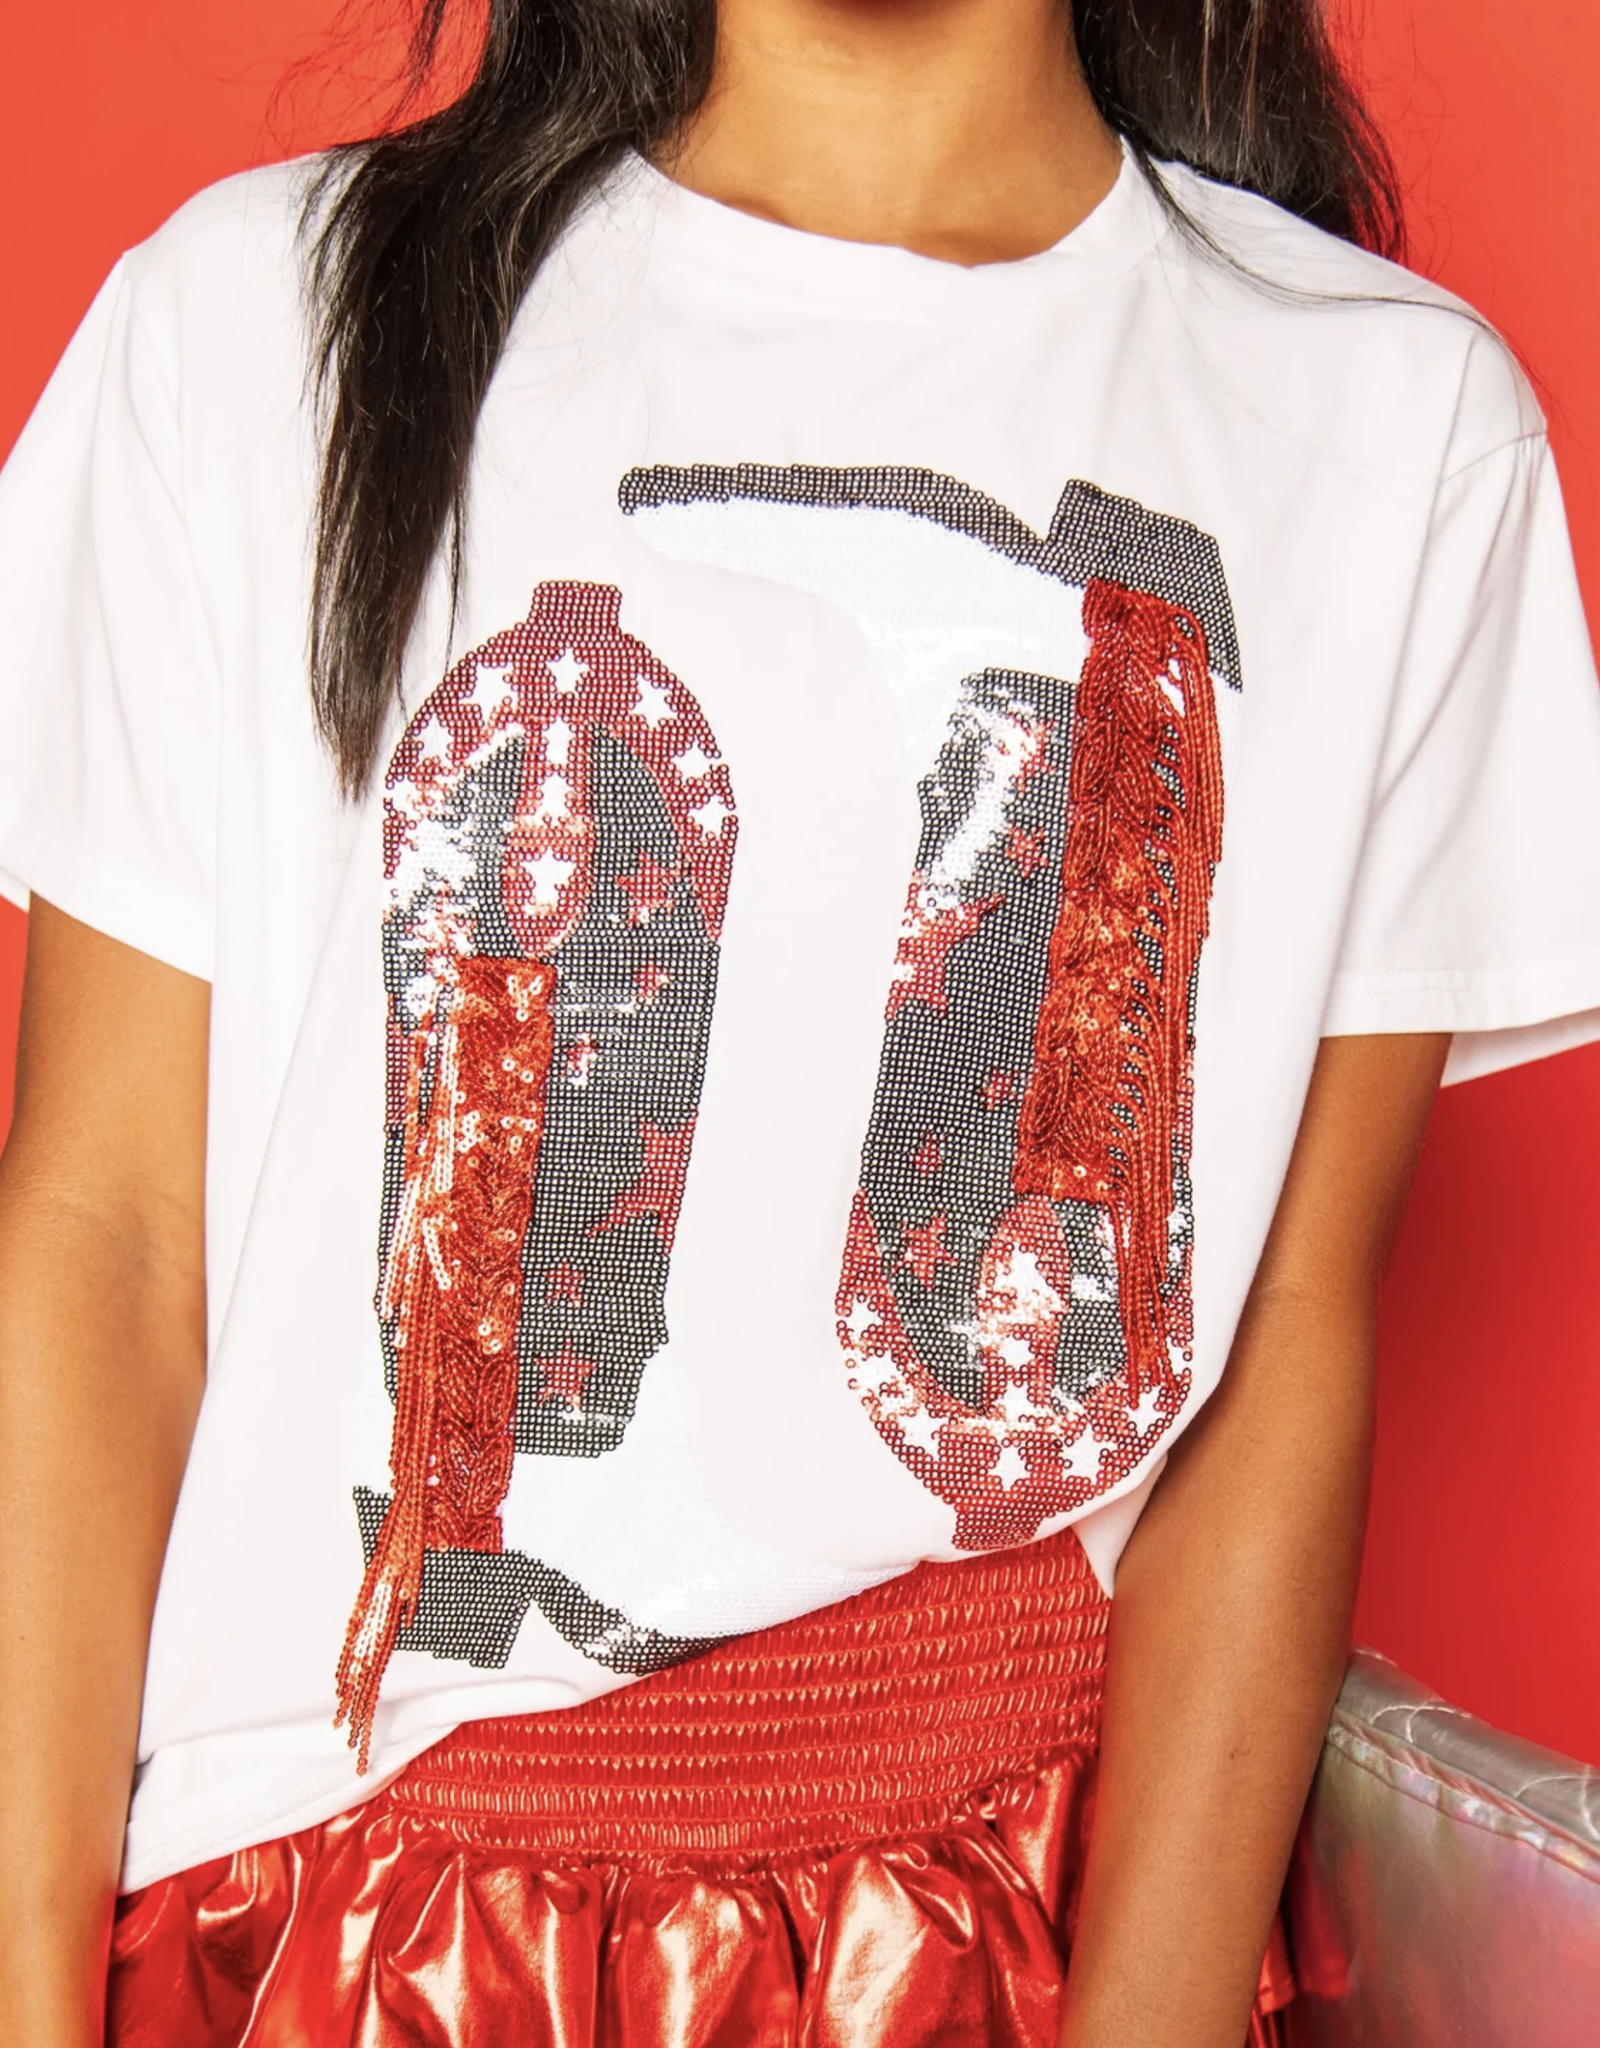 Queen of Sparkles Queen of Sparkles Black & Red Fringe Boot Tee